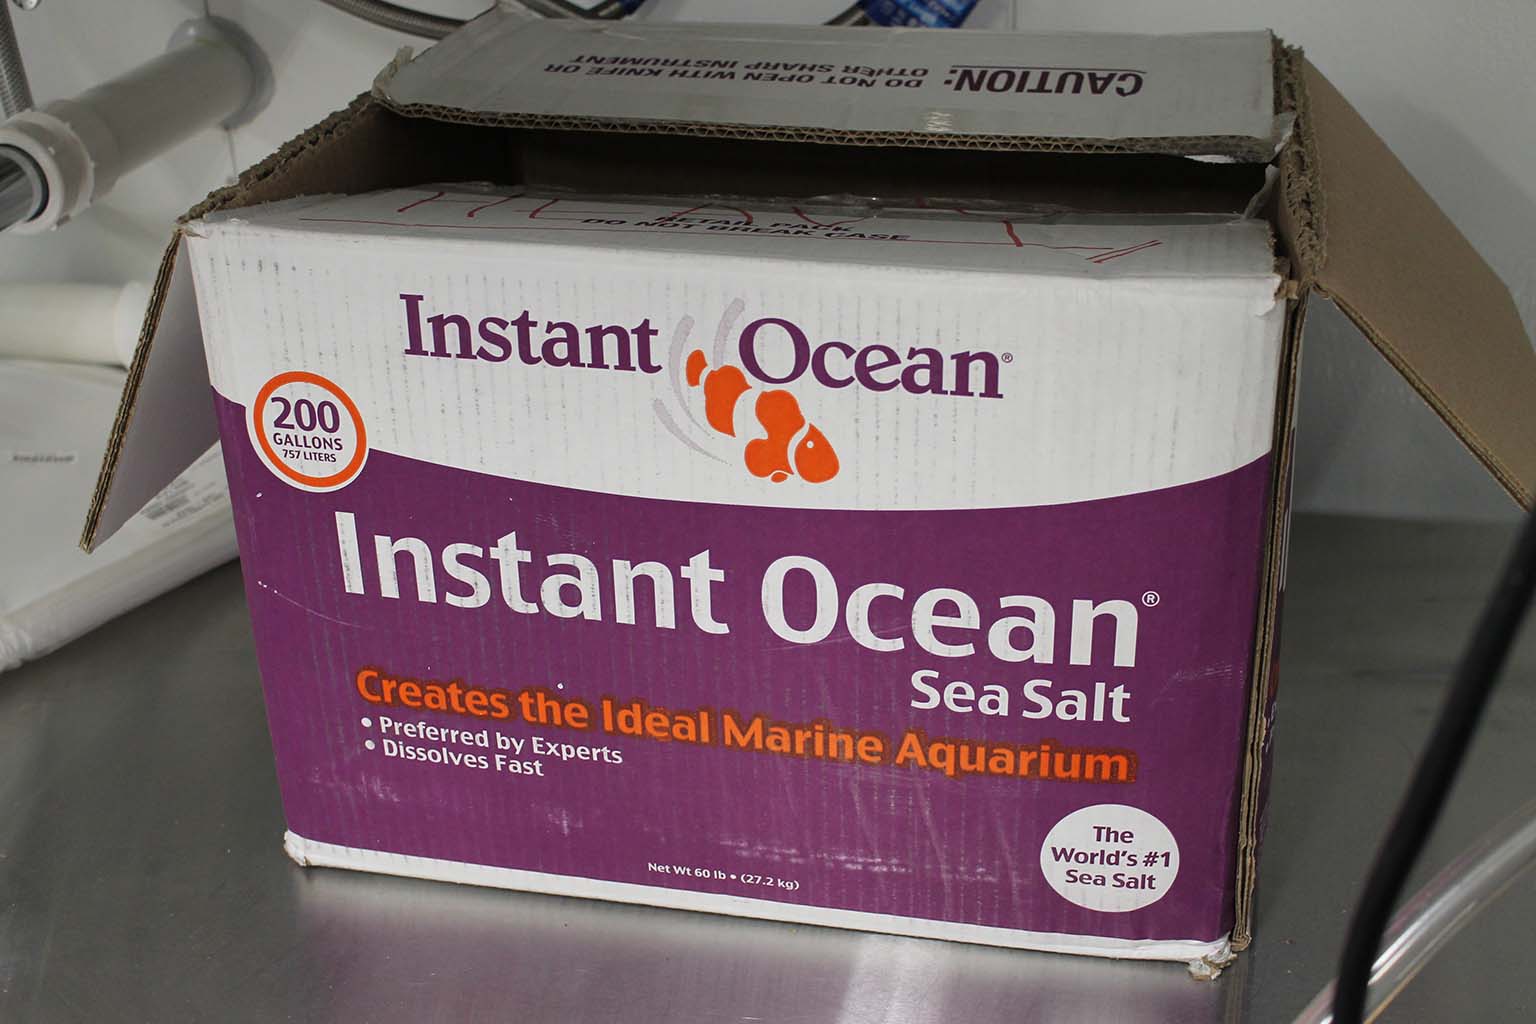 A 60-pound box of "Instant Ocean" sea salt used to create seawater for the coral tanks.